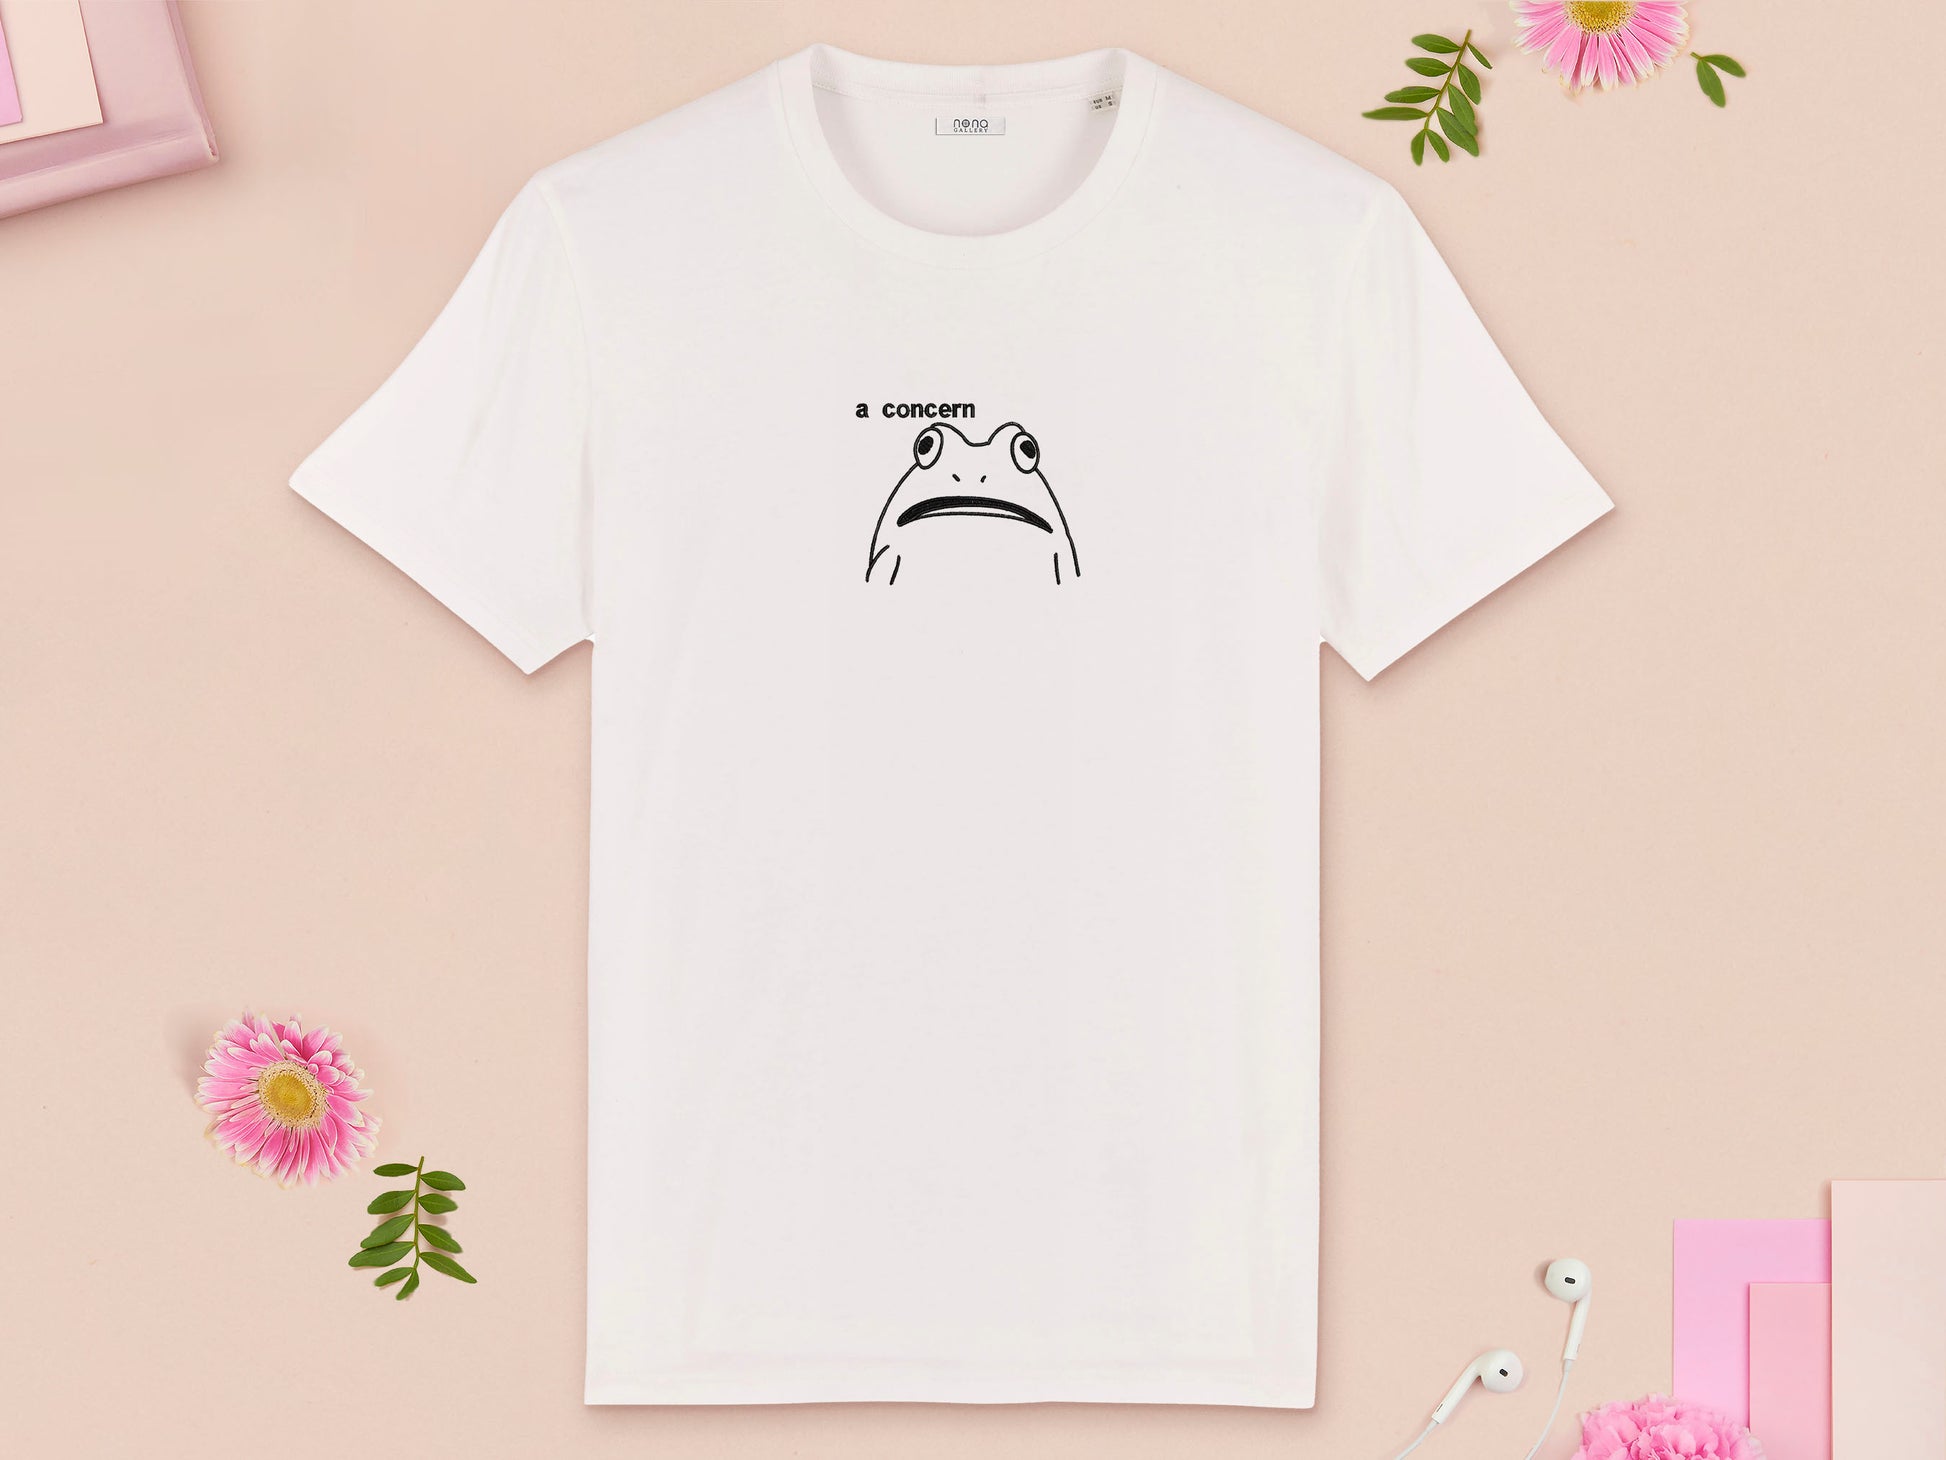 A off white crew neck short sleeve t-shirt, with an embroidered black thread design of cute confused looking frog with the text a concern.